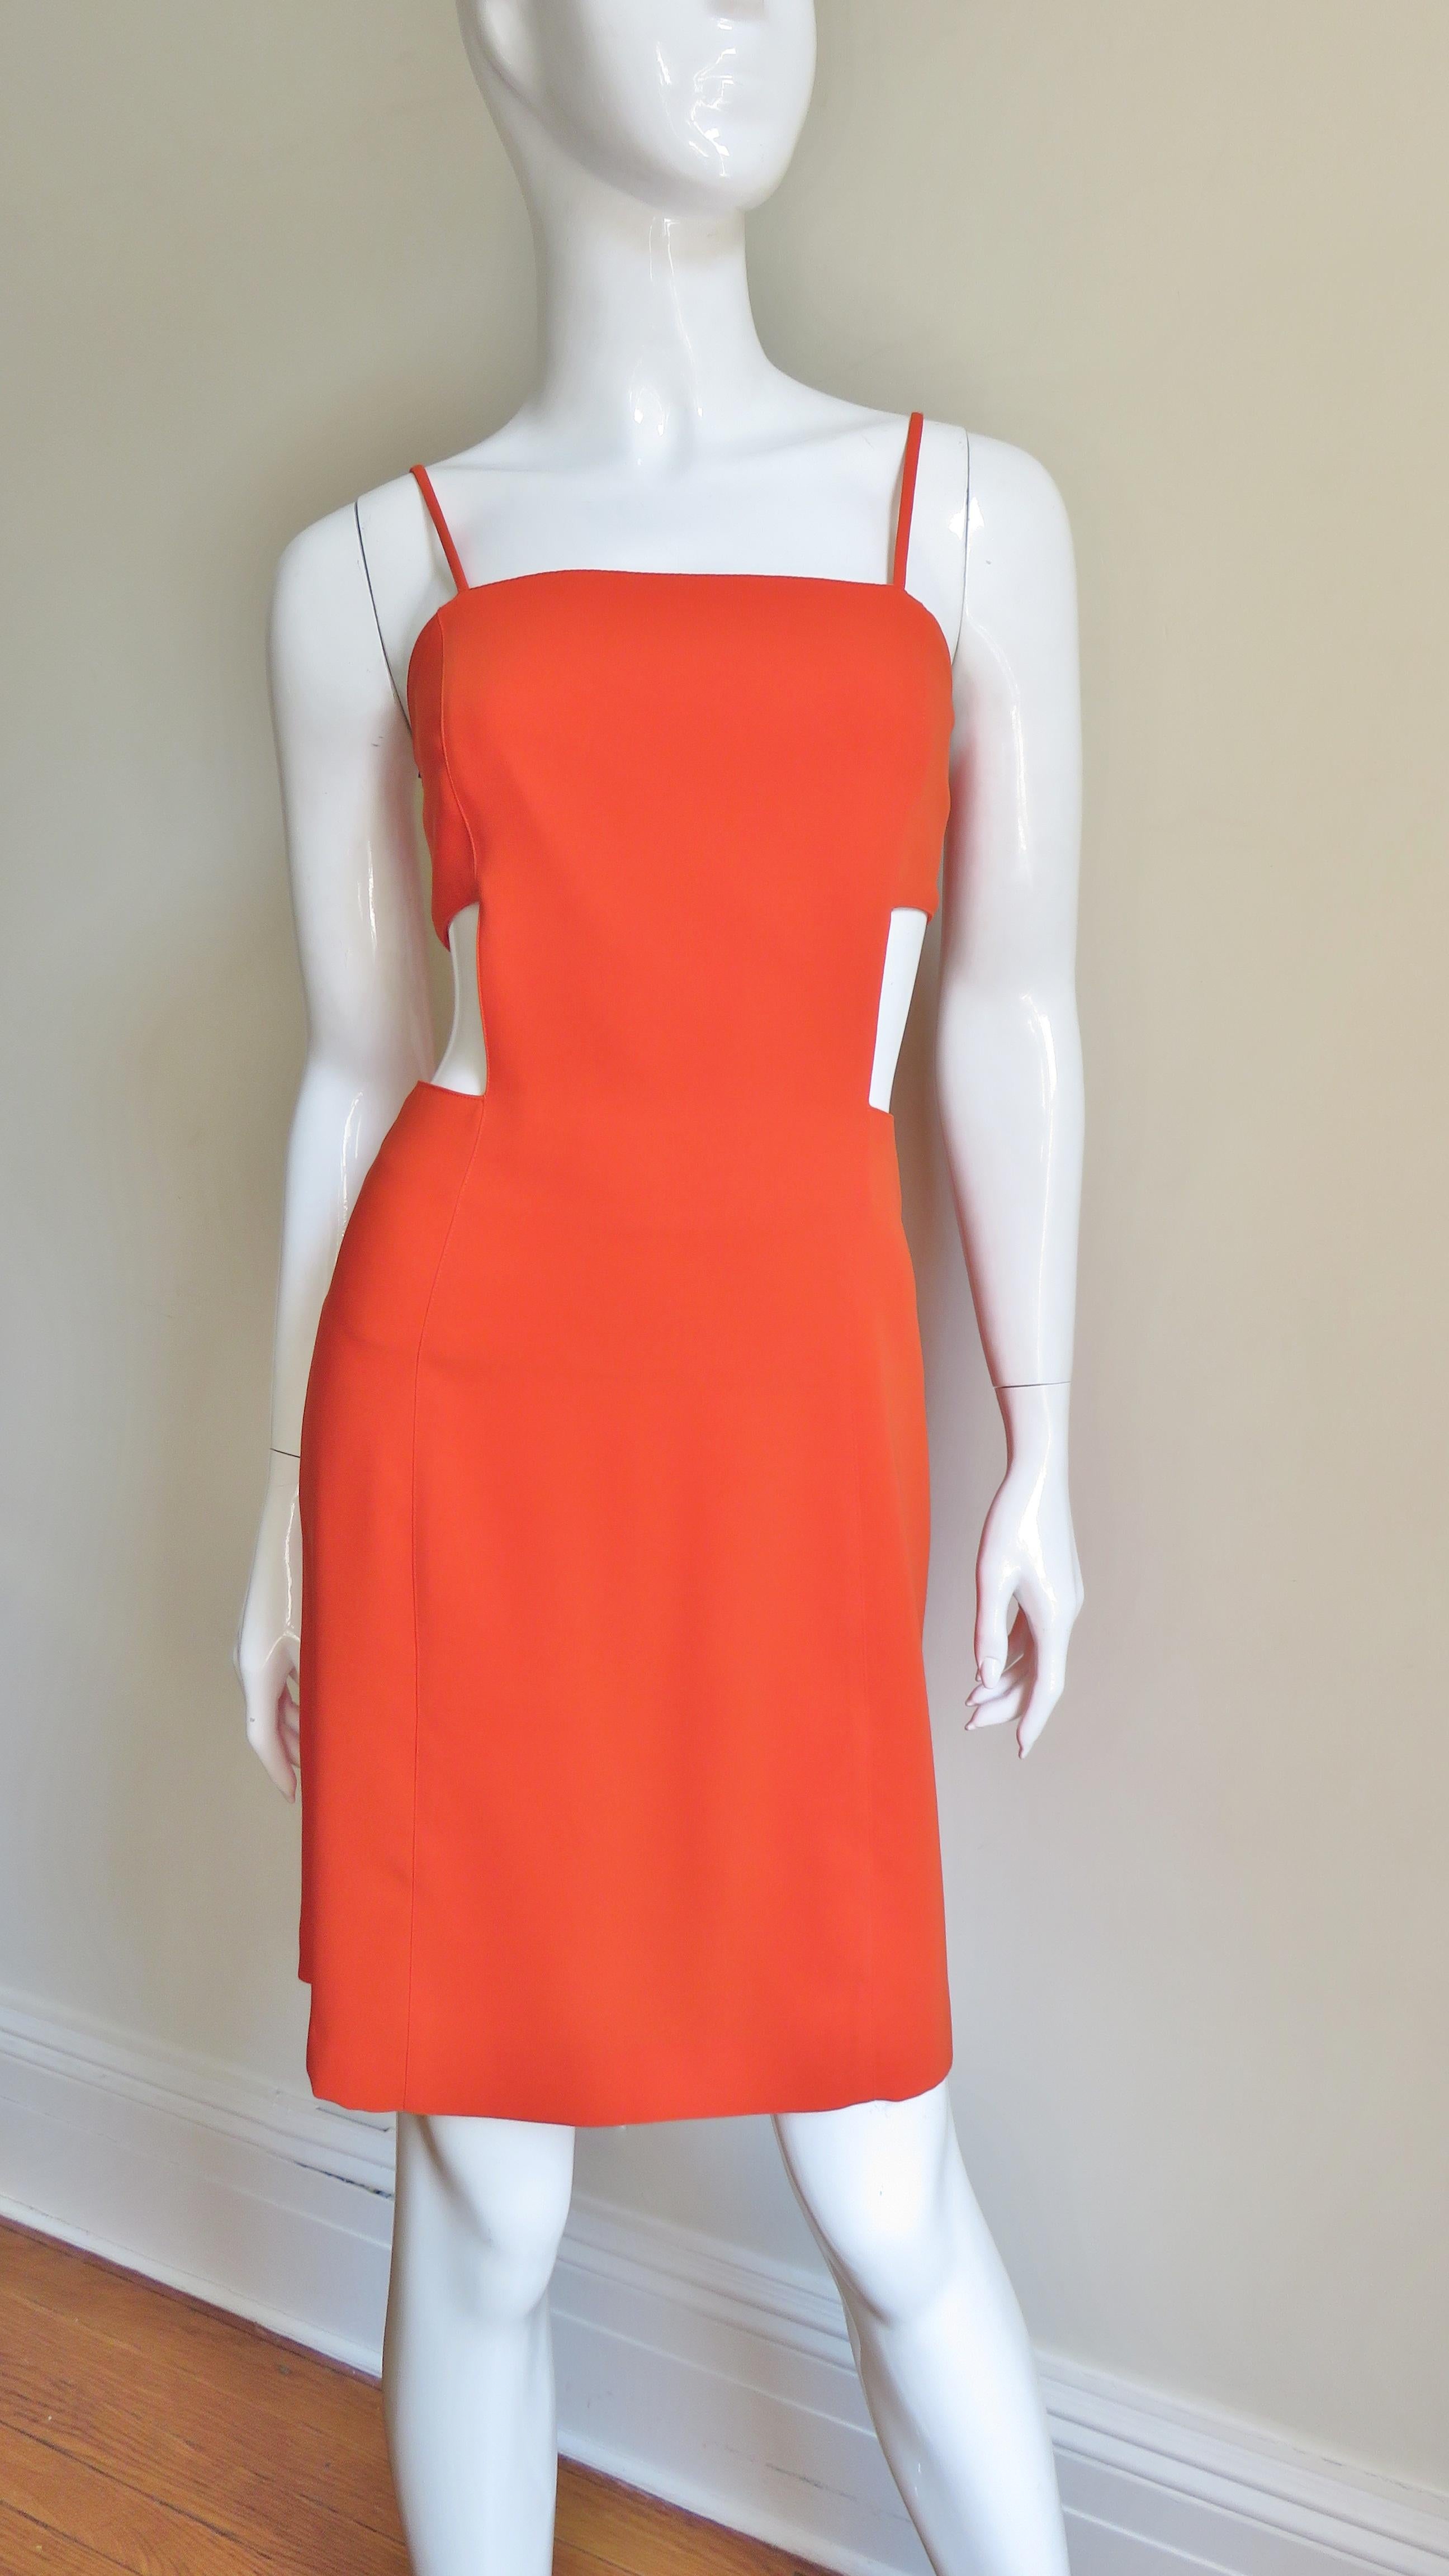 A fabulous orange dress from Thierry Mugler.  It is semi fitted with princess seaming, spaghetti straps and fabulous square cutouts at both sides of the waist.  It is lined in matching orange and has matching back zipper.
Fits size Extra Small,